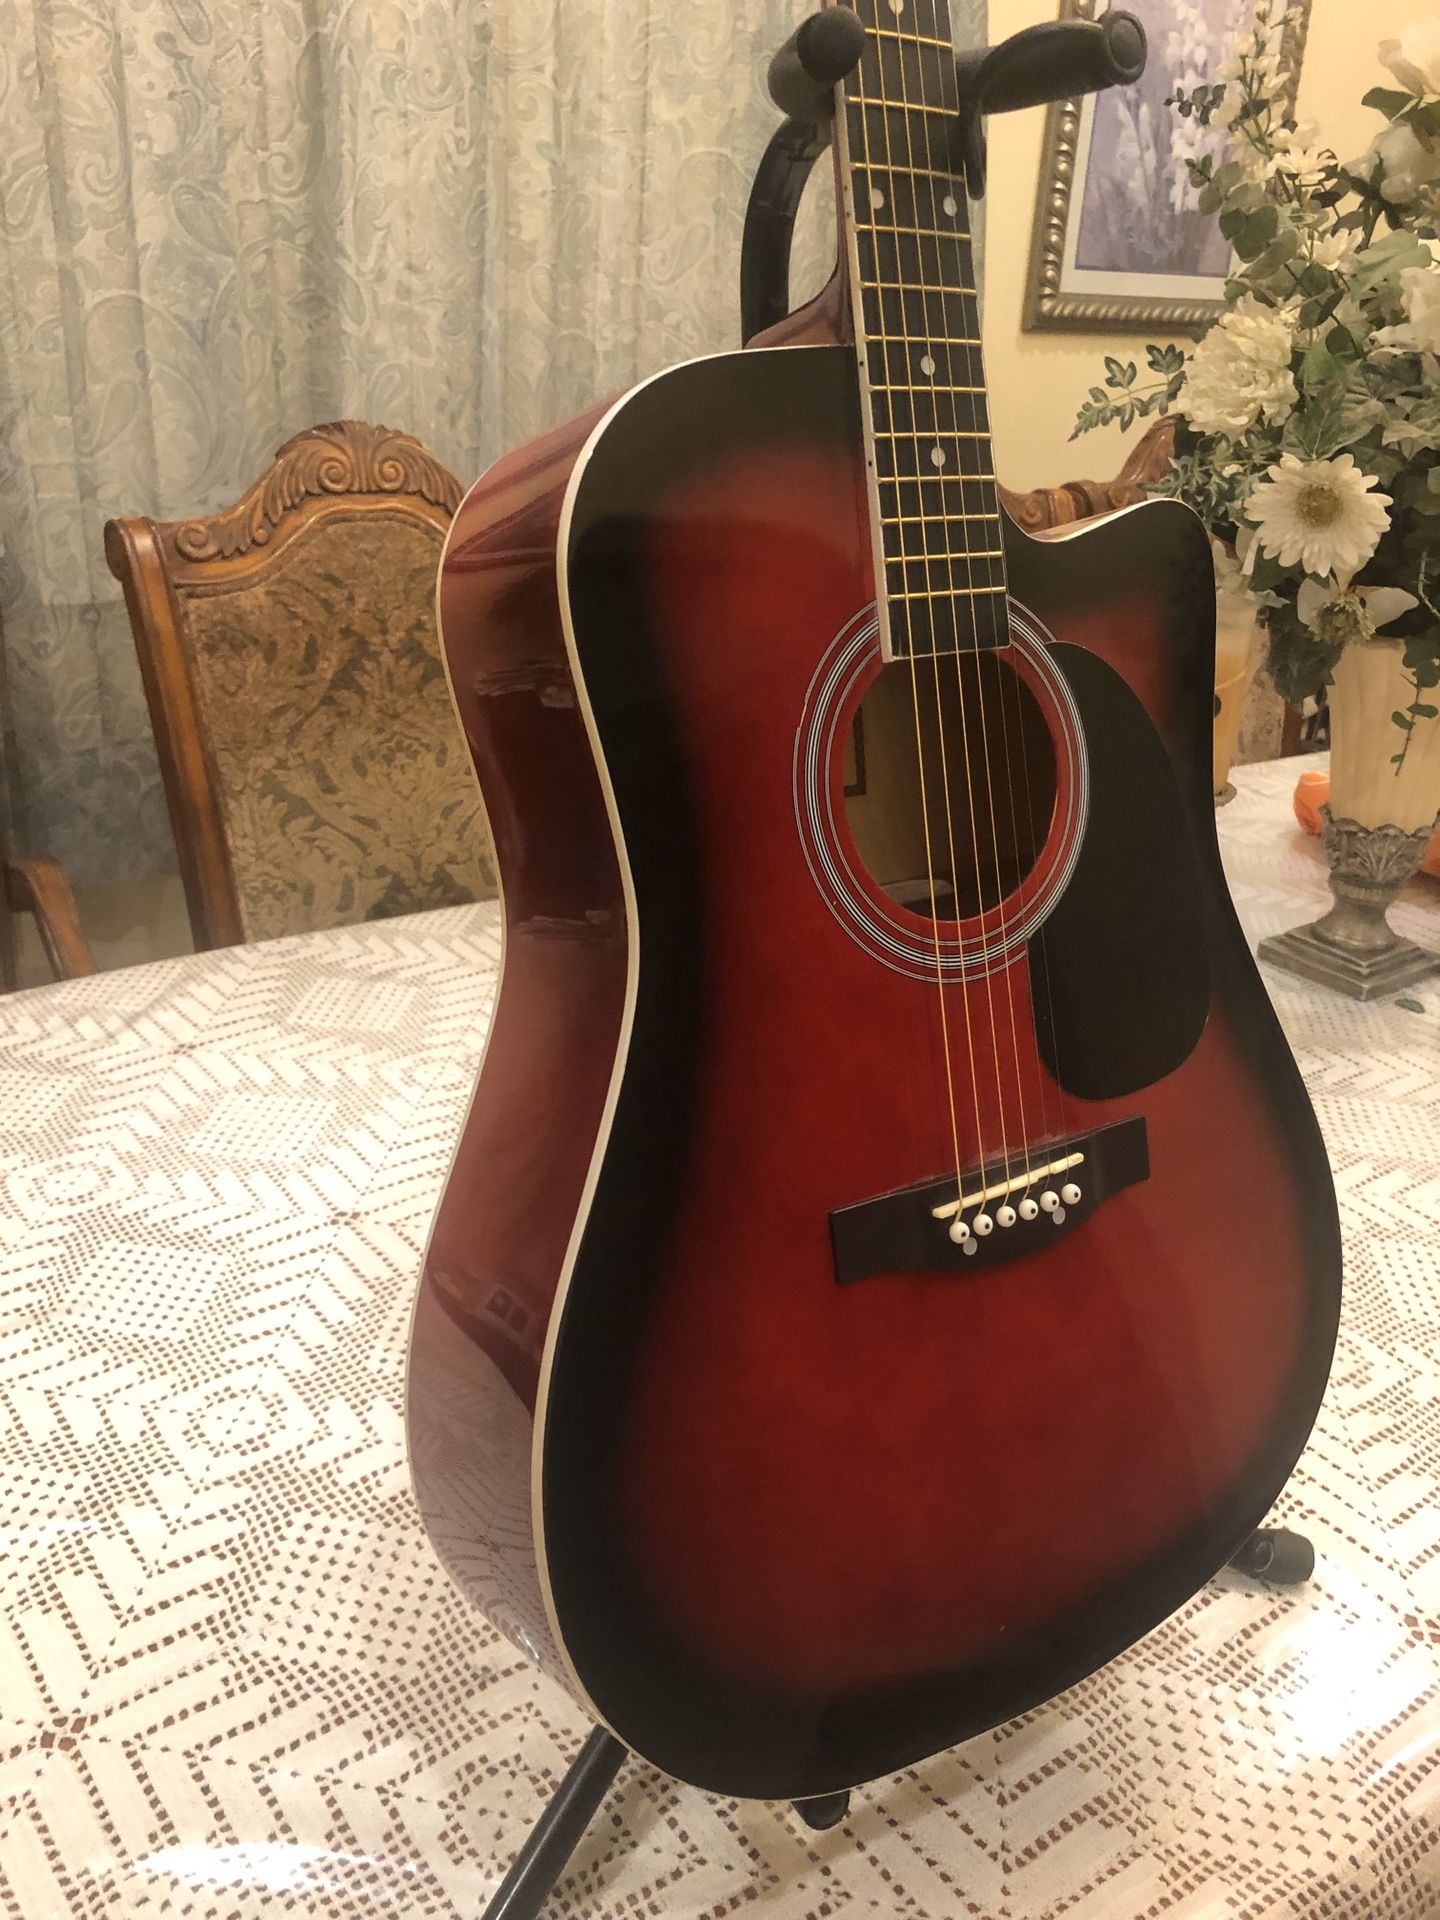 Fever acoustic guitar with metal strings